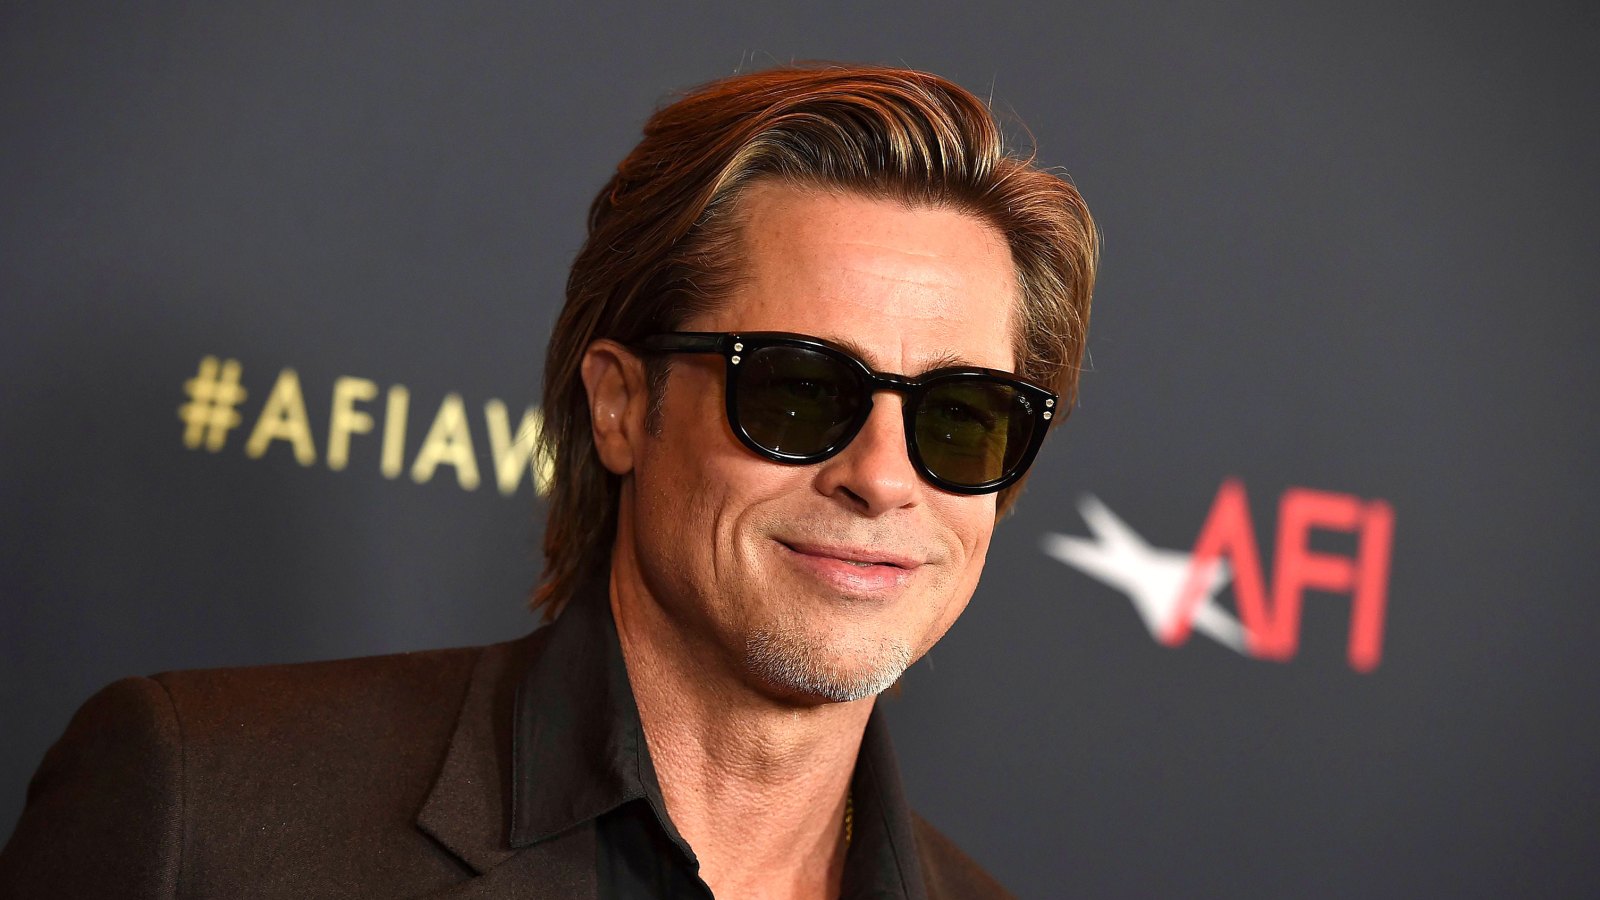 Brad Pitt Explains Why ‘Comfort’ Is Key With His Fashion: ‘You Get Older, You Get Crankier’